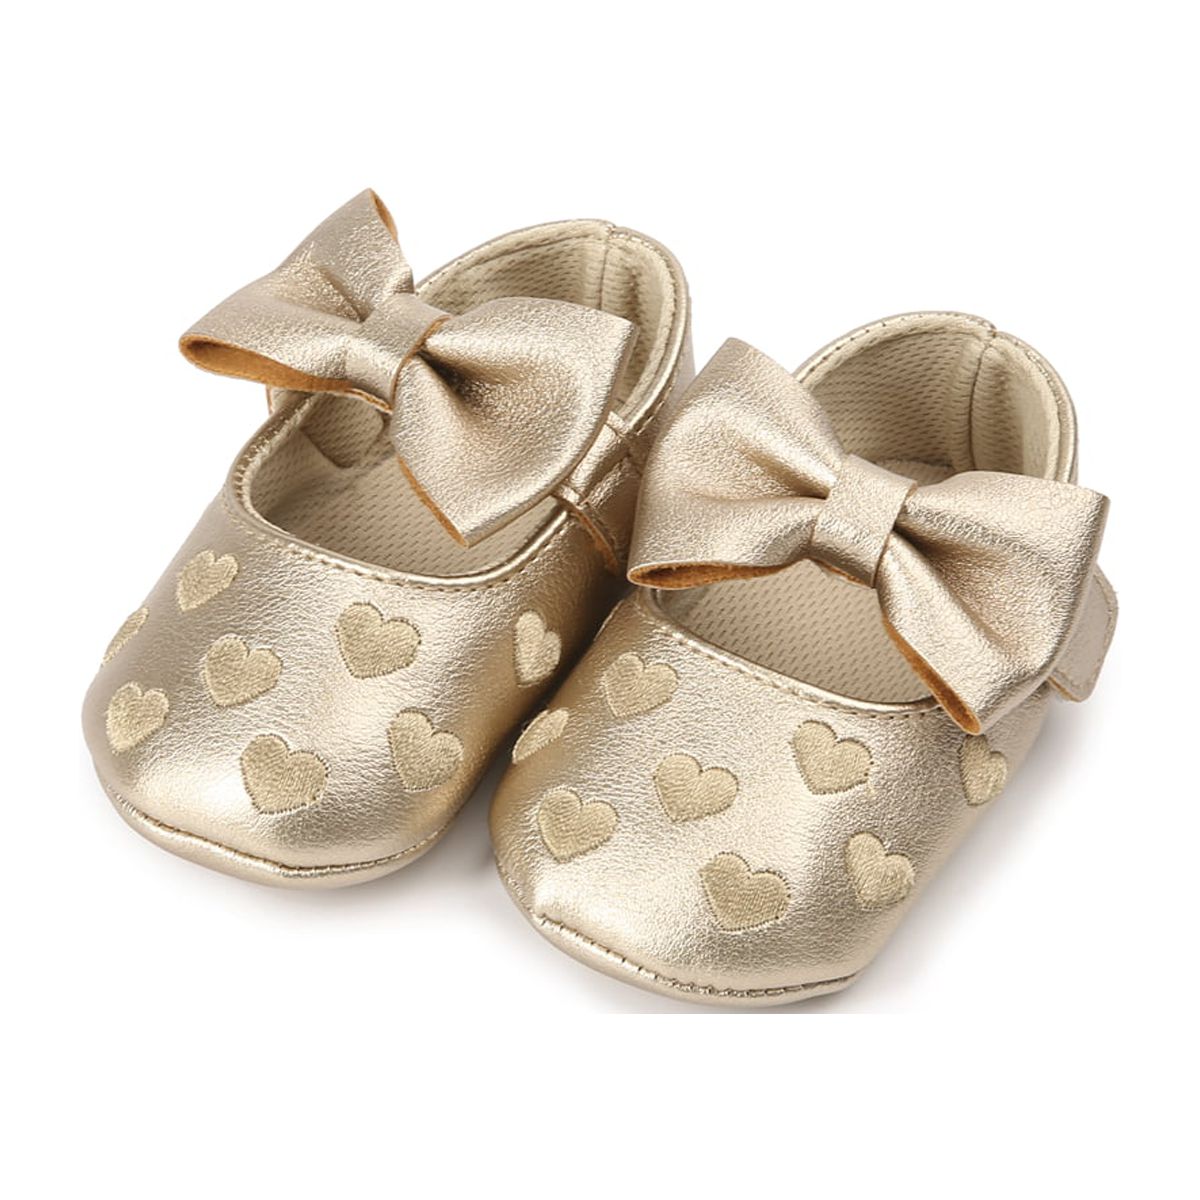 Musuos Girls Bowknot Moccasins, Soft Sole Crib Shoes, Anti-slip Shoes - image 1 of 4